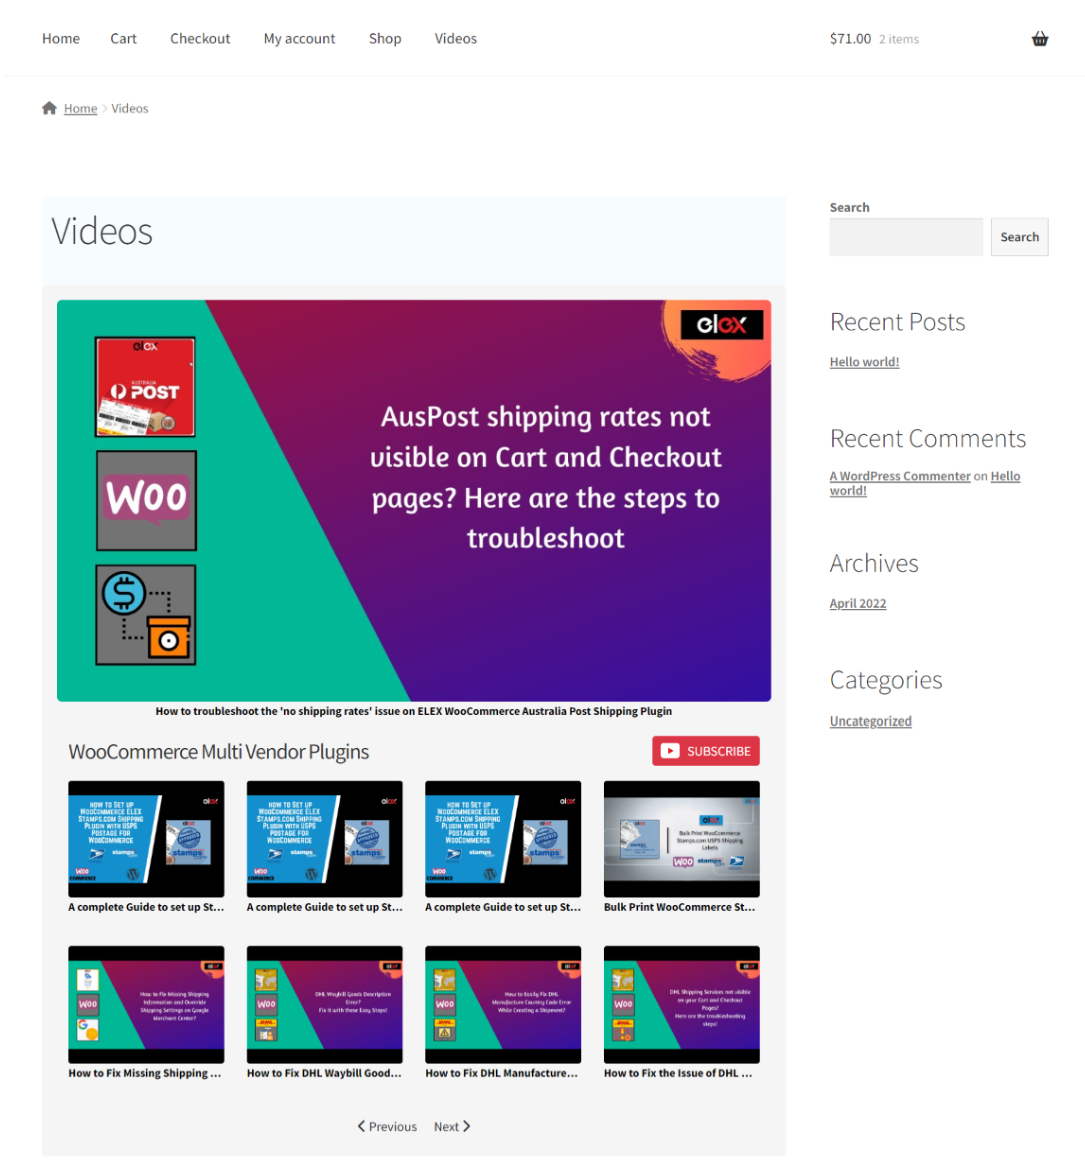 front-end view of the YouTube playlist on your website